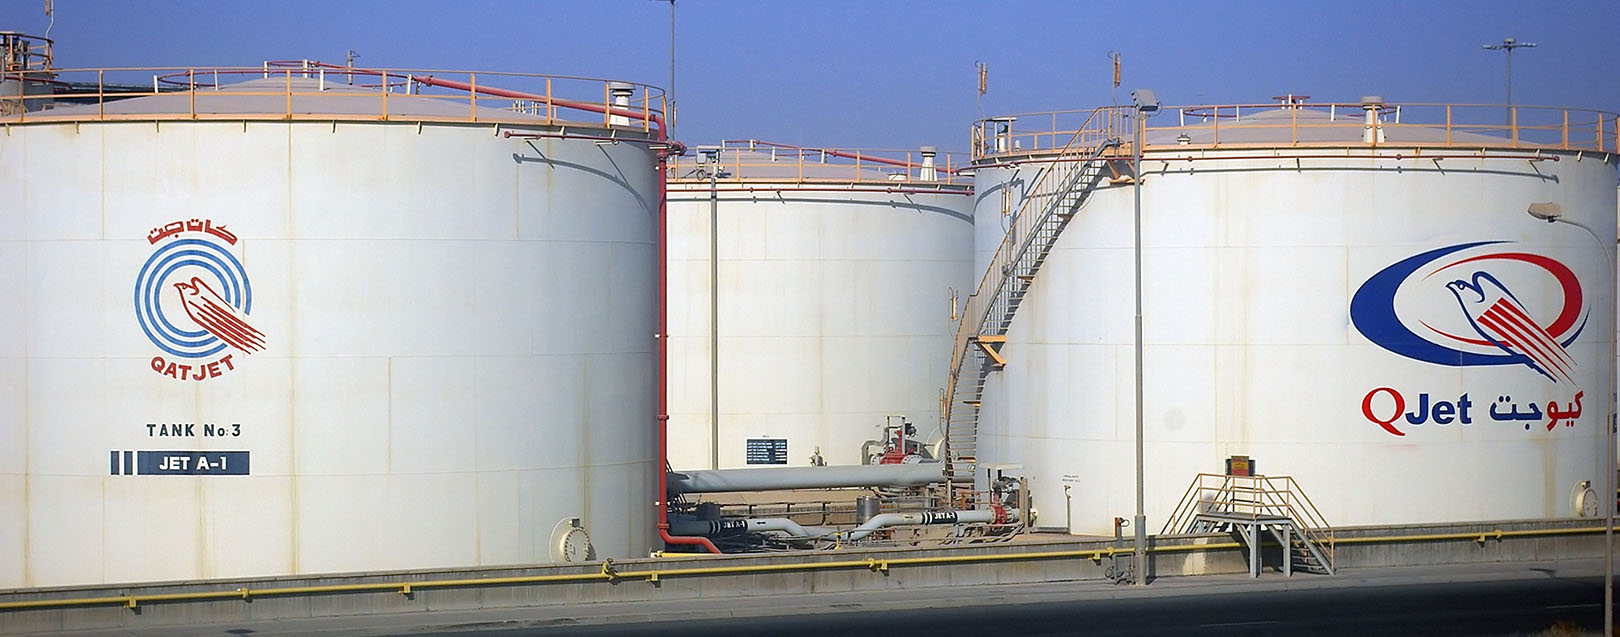 Qatar to reduce oil production from next year